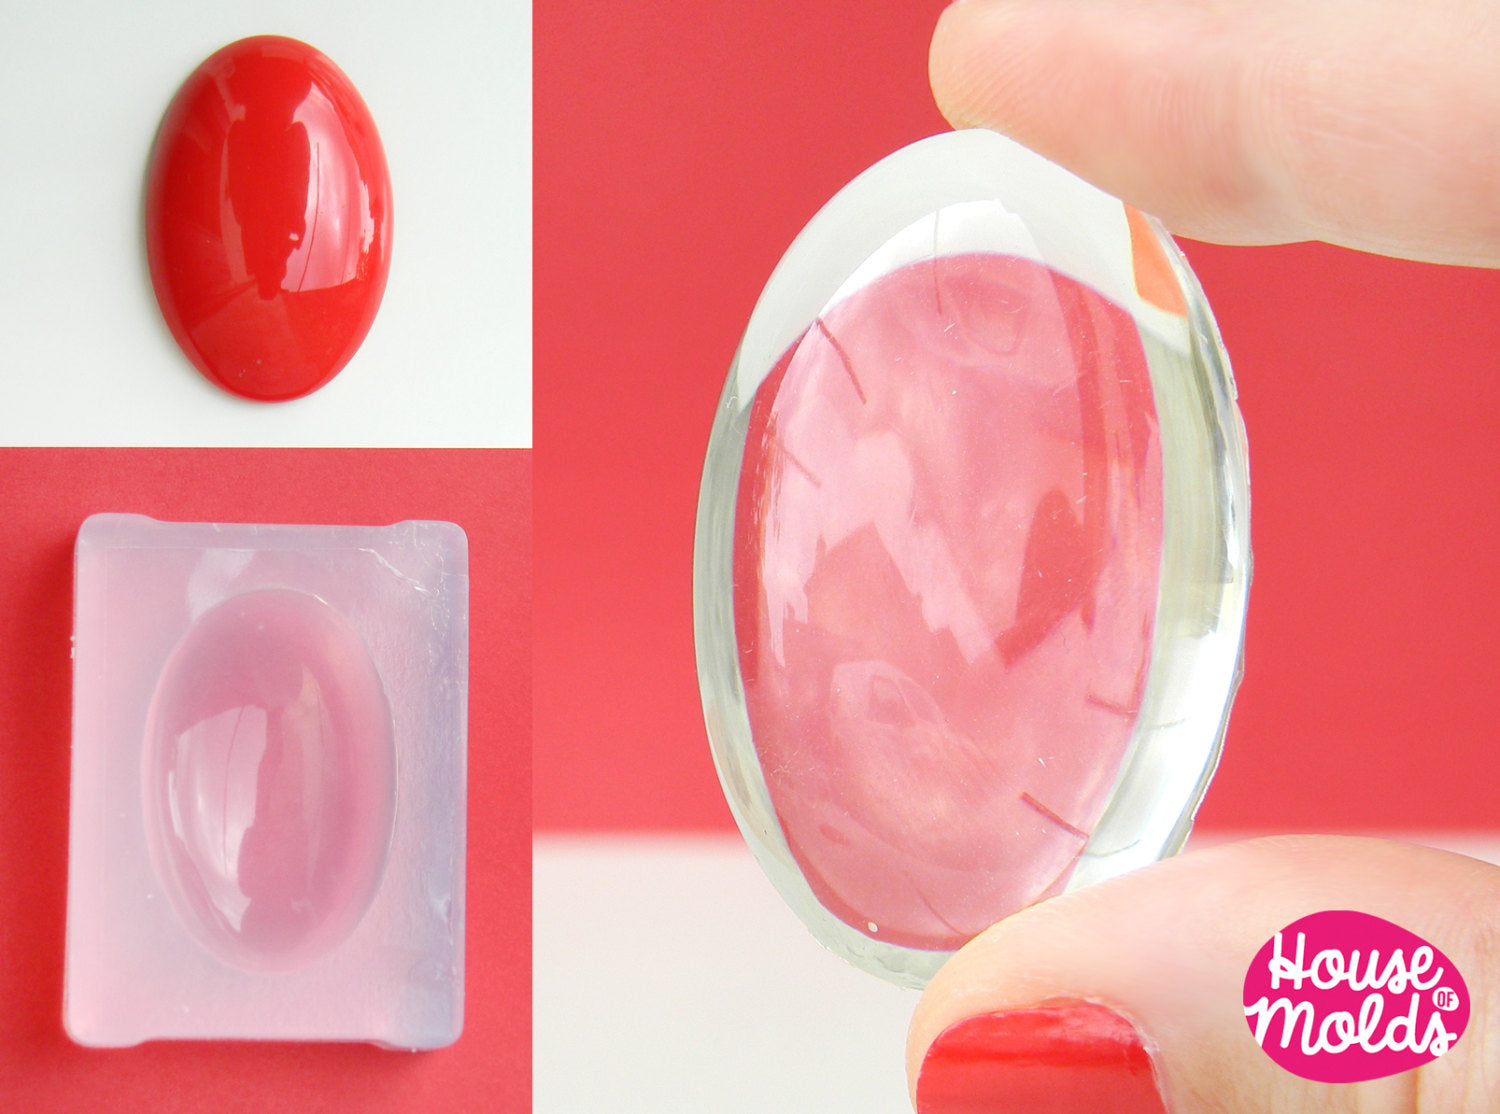 Silicone Cabochons Mold